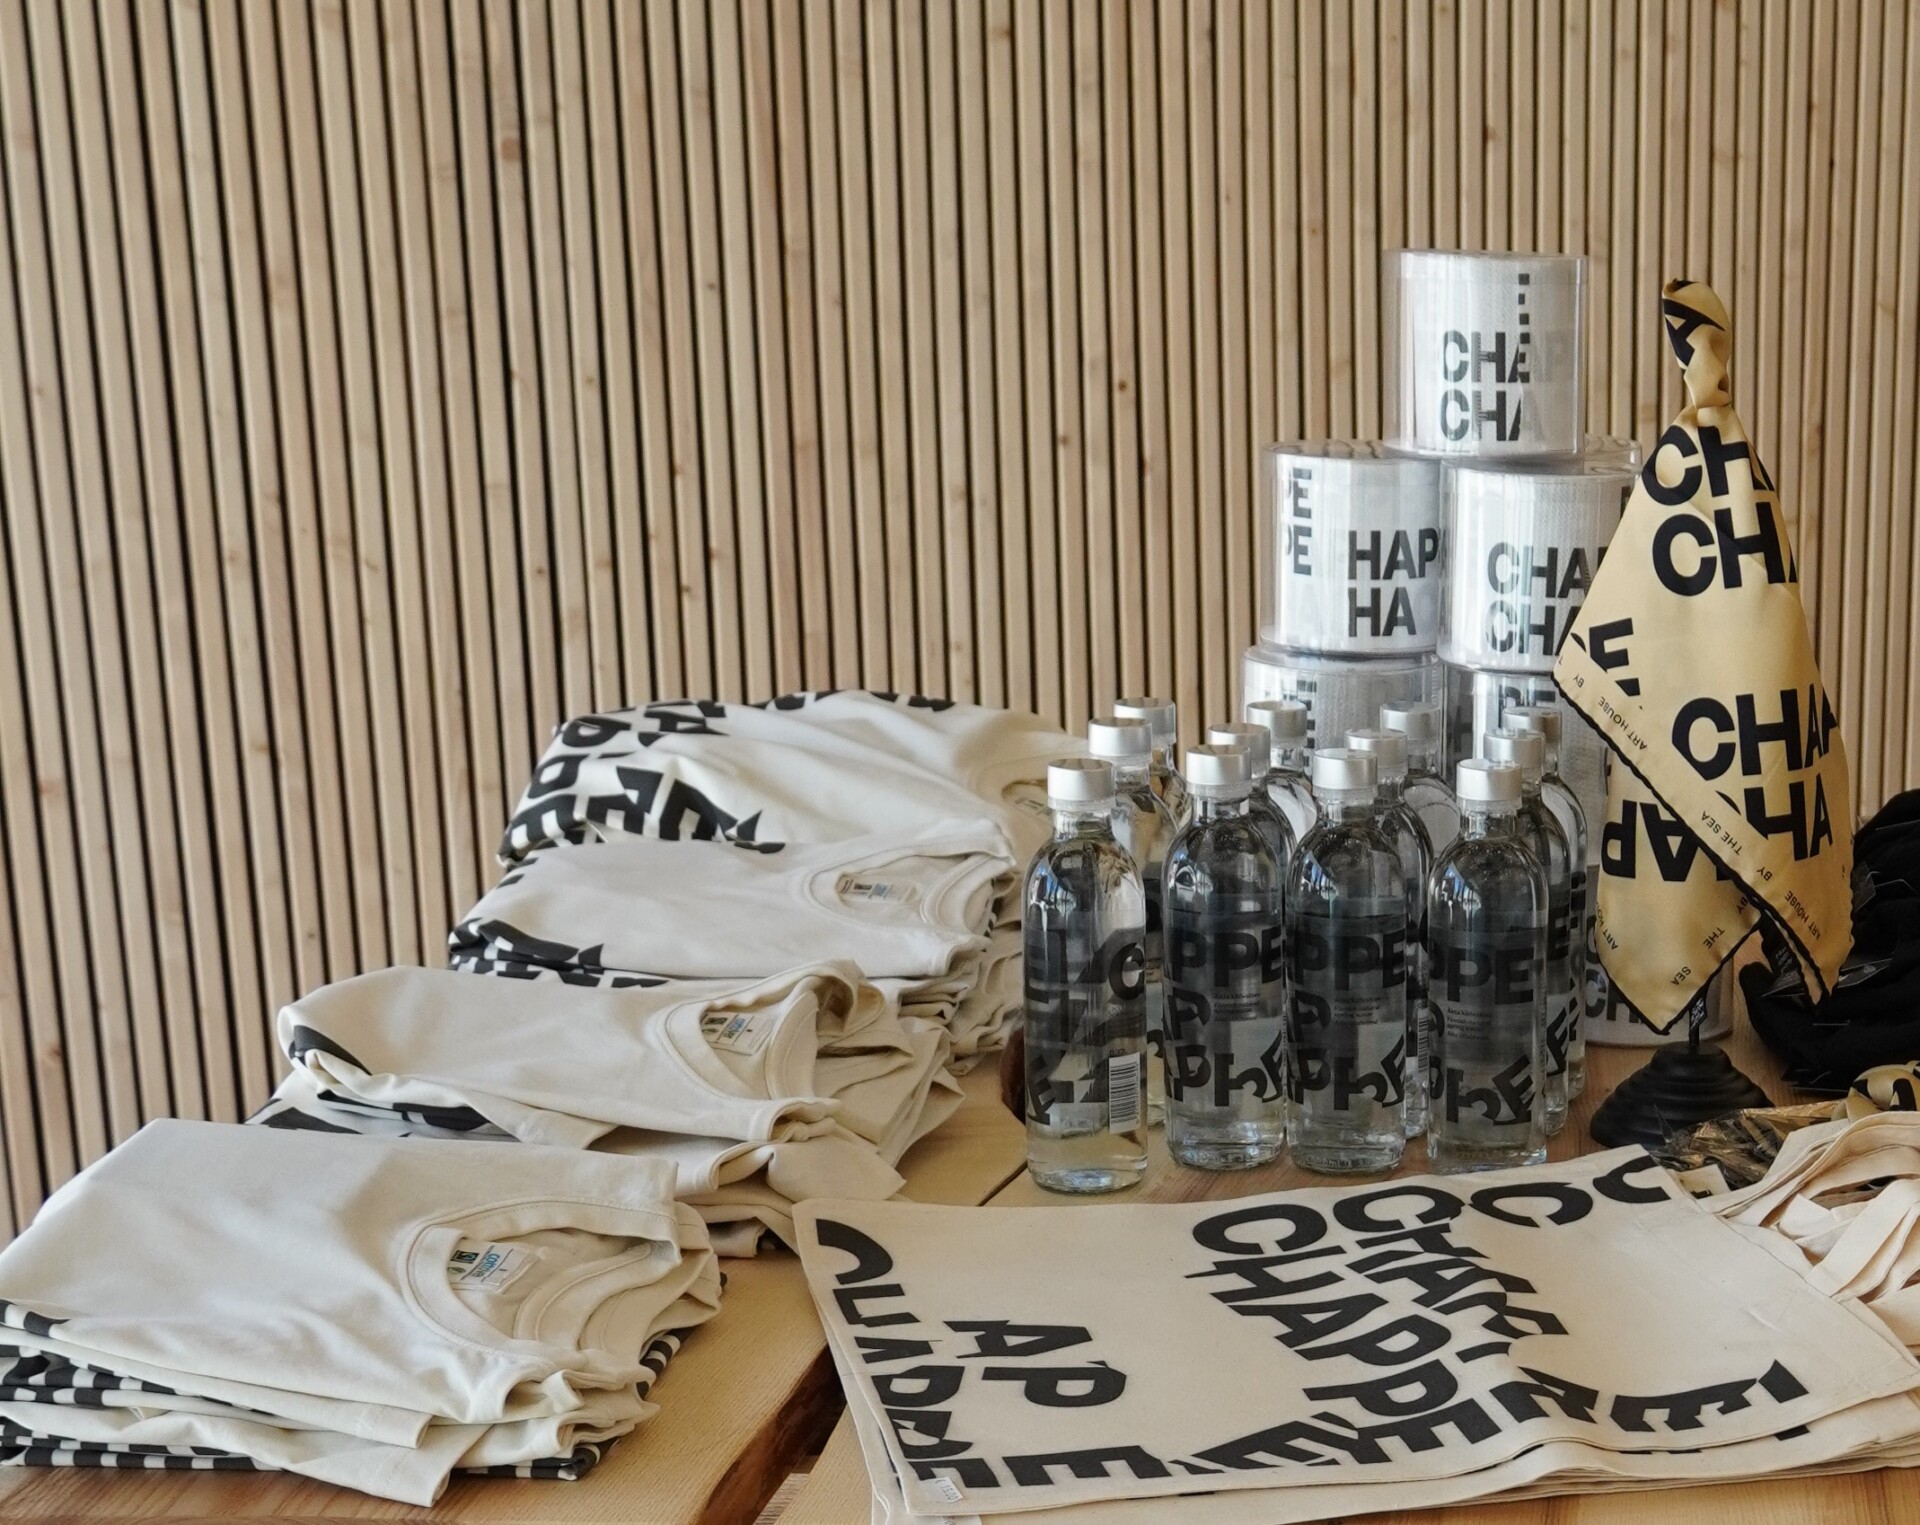 Chappe products on a table against a wooden wall. The products consist of t-shirts, water bottles, canvas tote bags, toilet paper, and a scarf. All products have the Chappe logo on them.